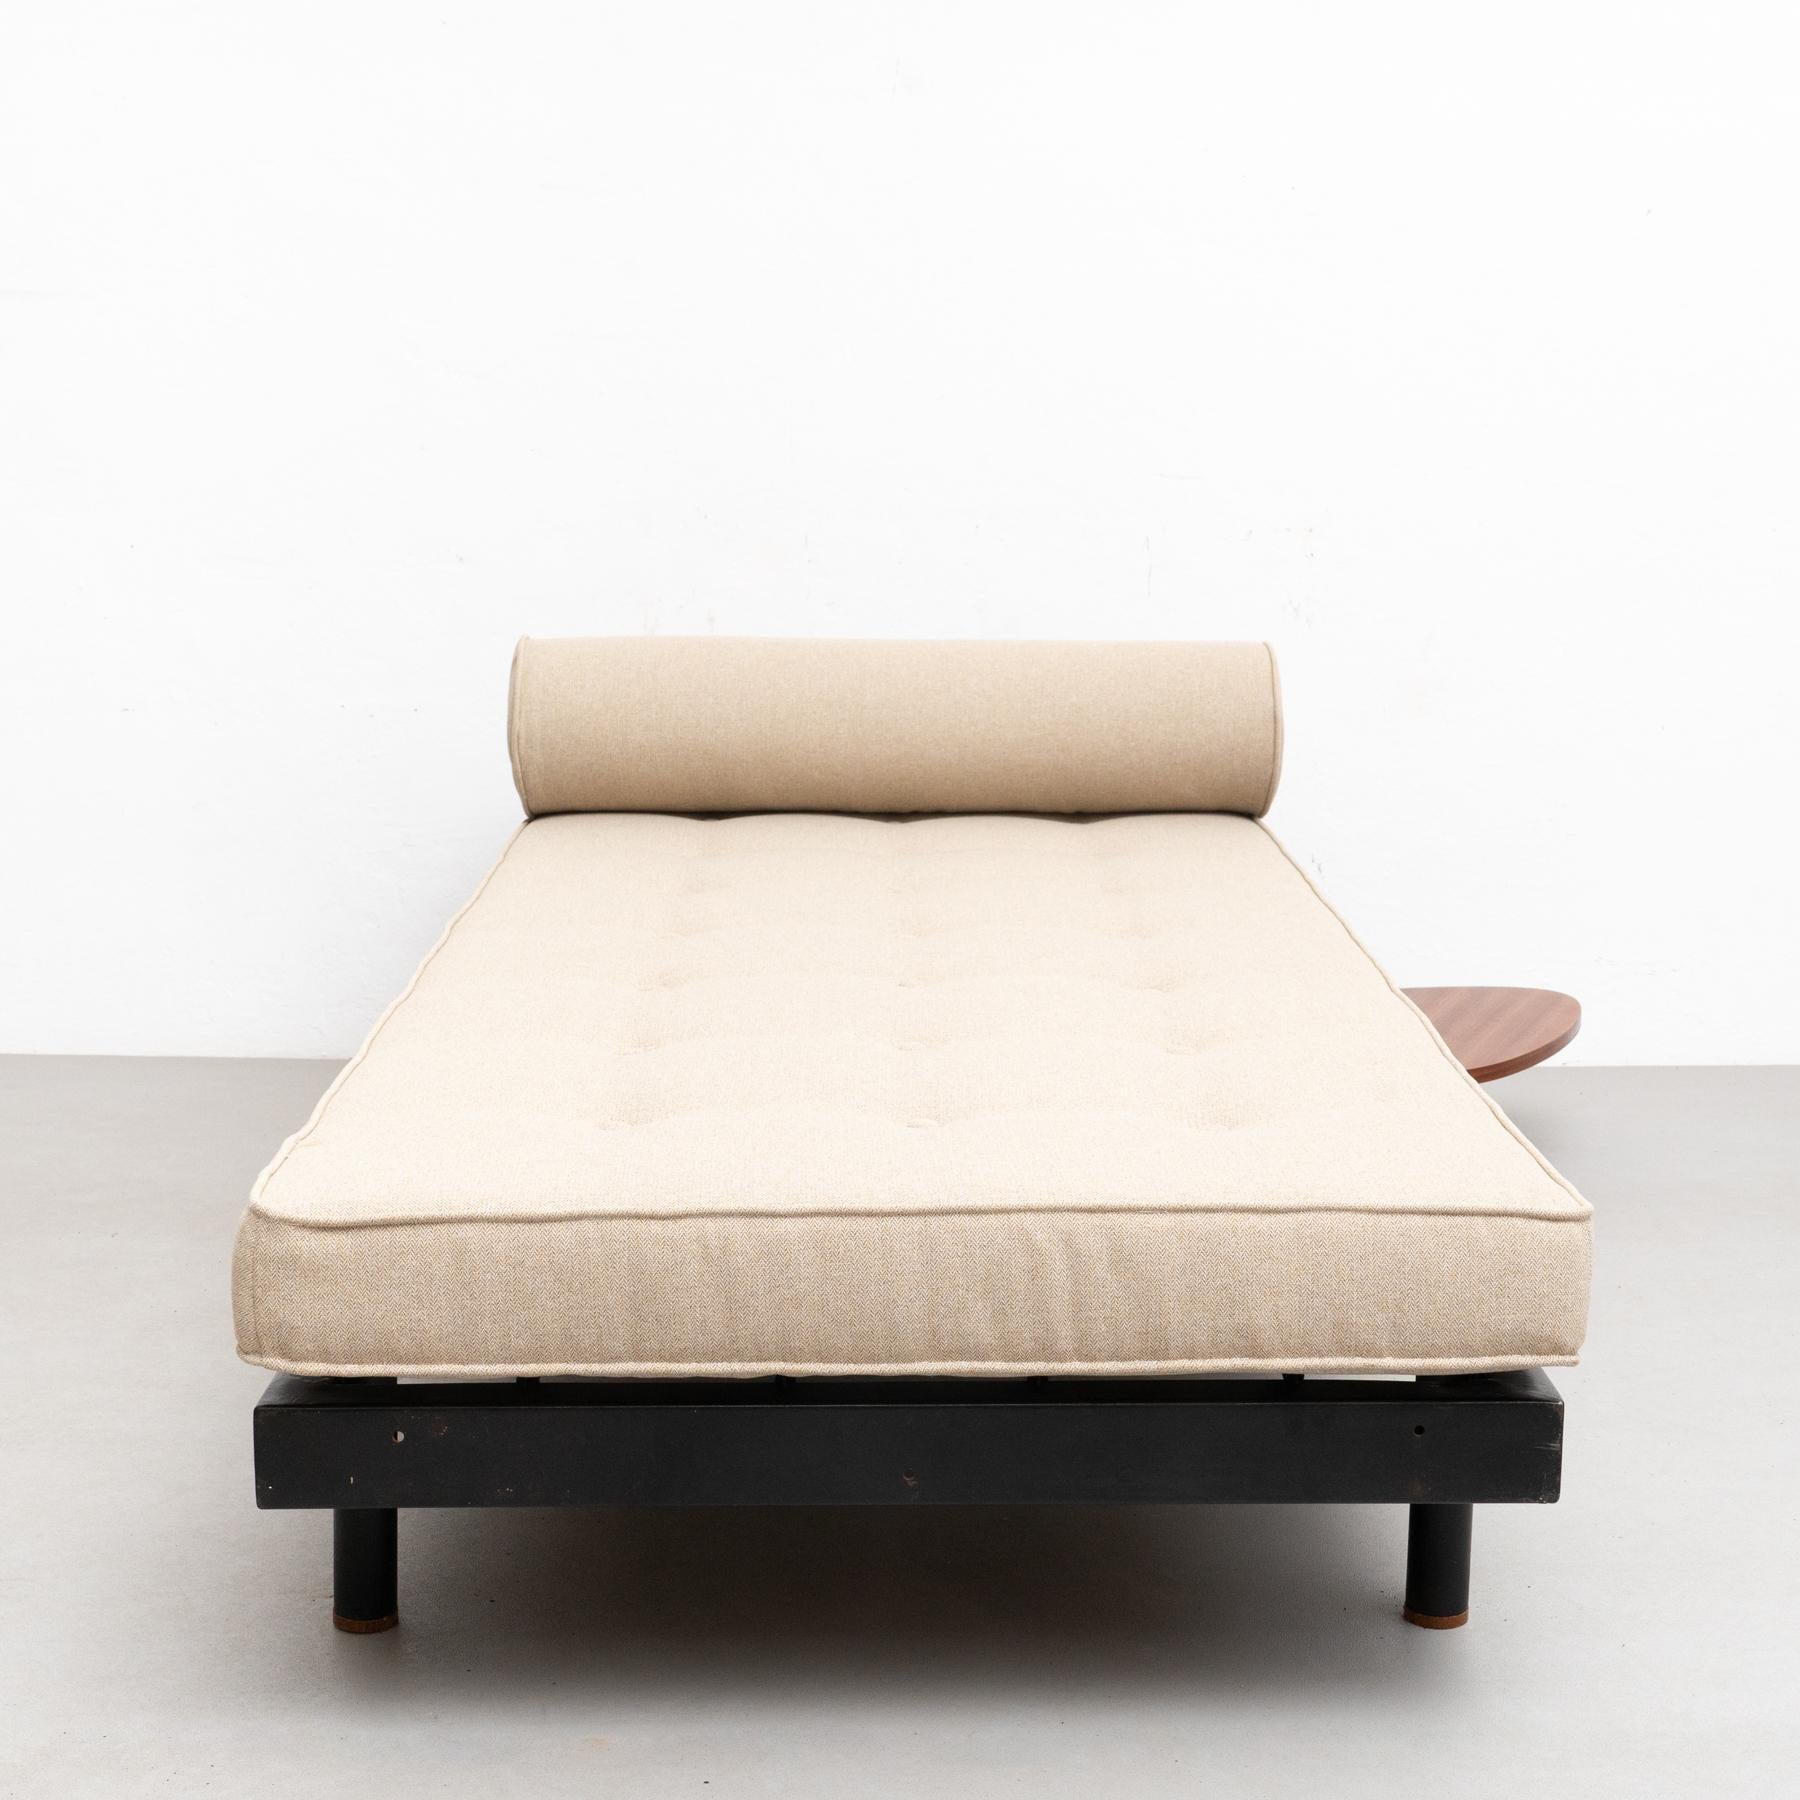 Mid-20th Century Jean Prouve Mid-Century Modern S.C.A.L. Daybed, circa 1950